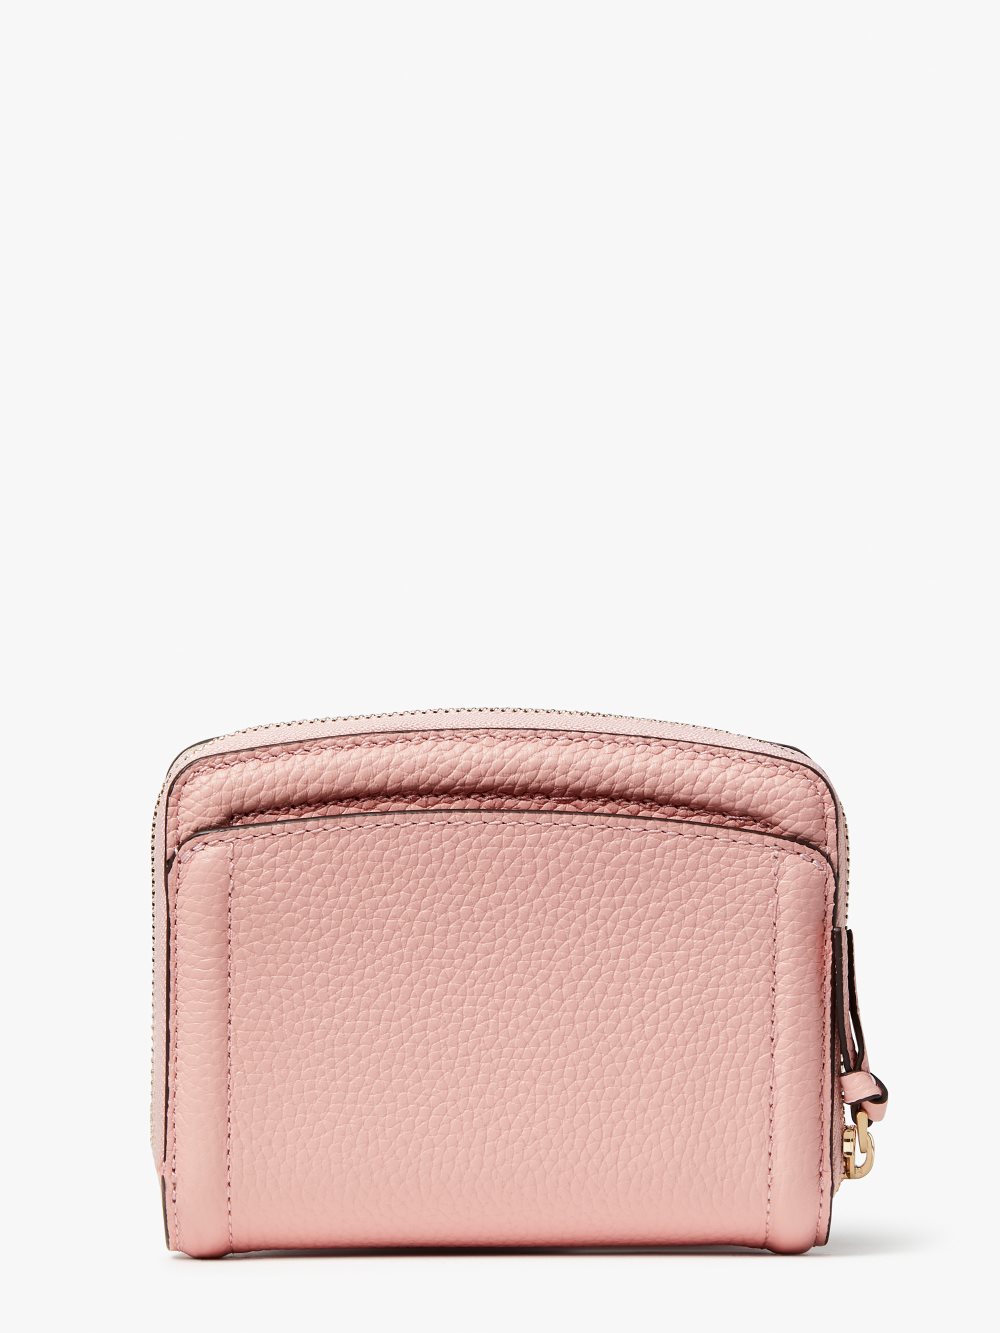 Women's coral gable knott small compact wallet | Kate Spade